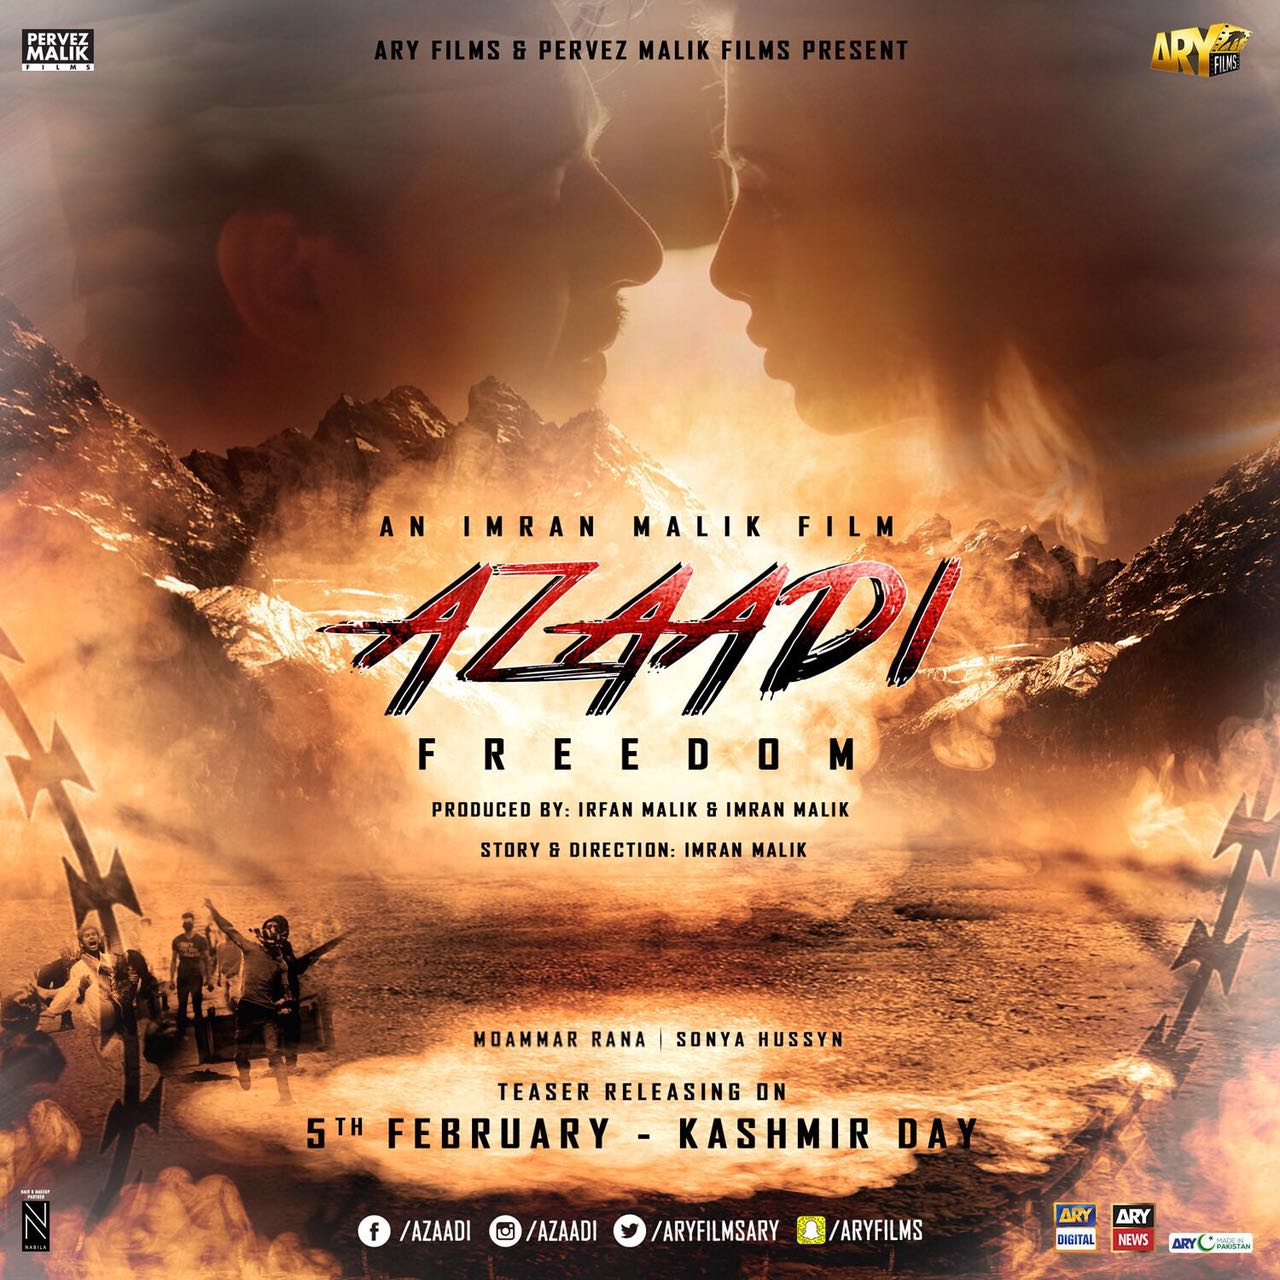 press-release-moammar-rana-and-sonya-hussyn-starrer-azaadi-teaser-is-set-to-release-on-5th-february-2017